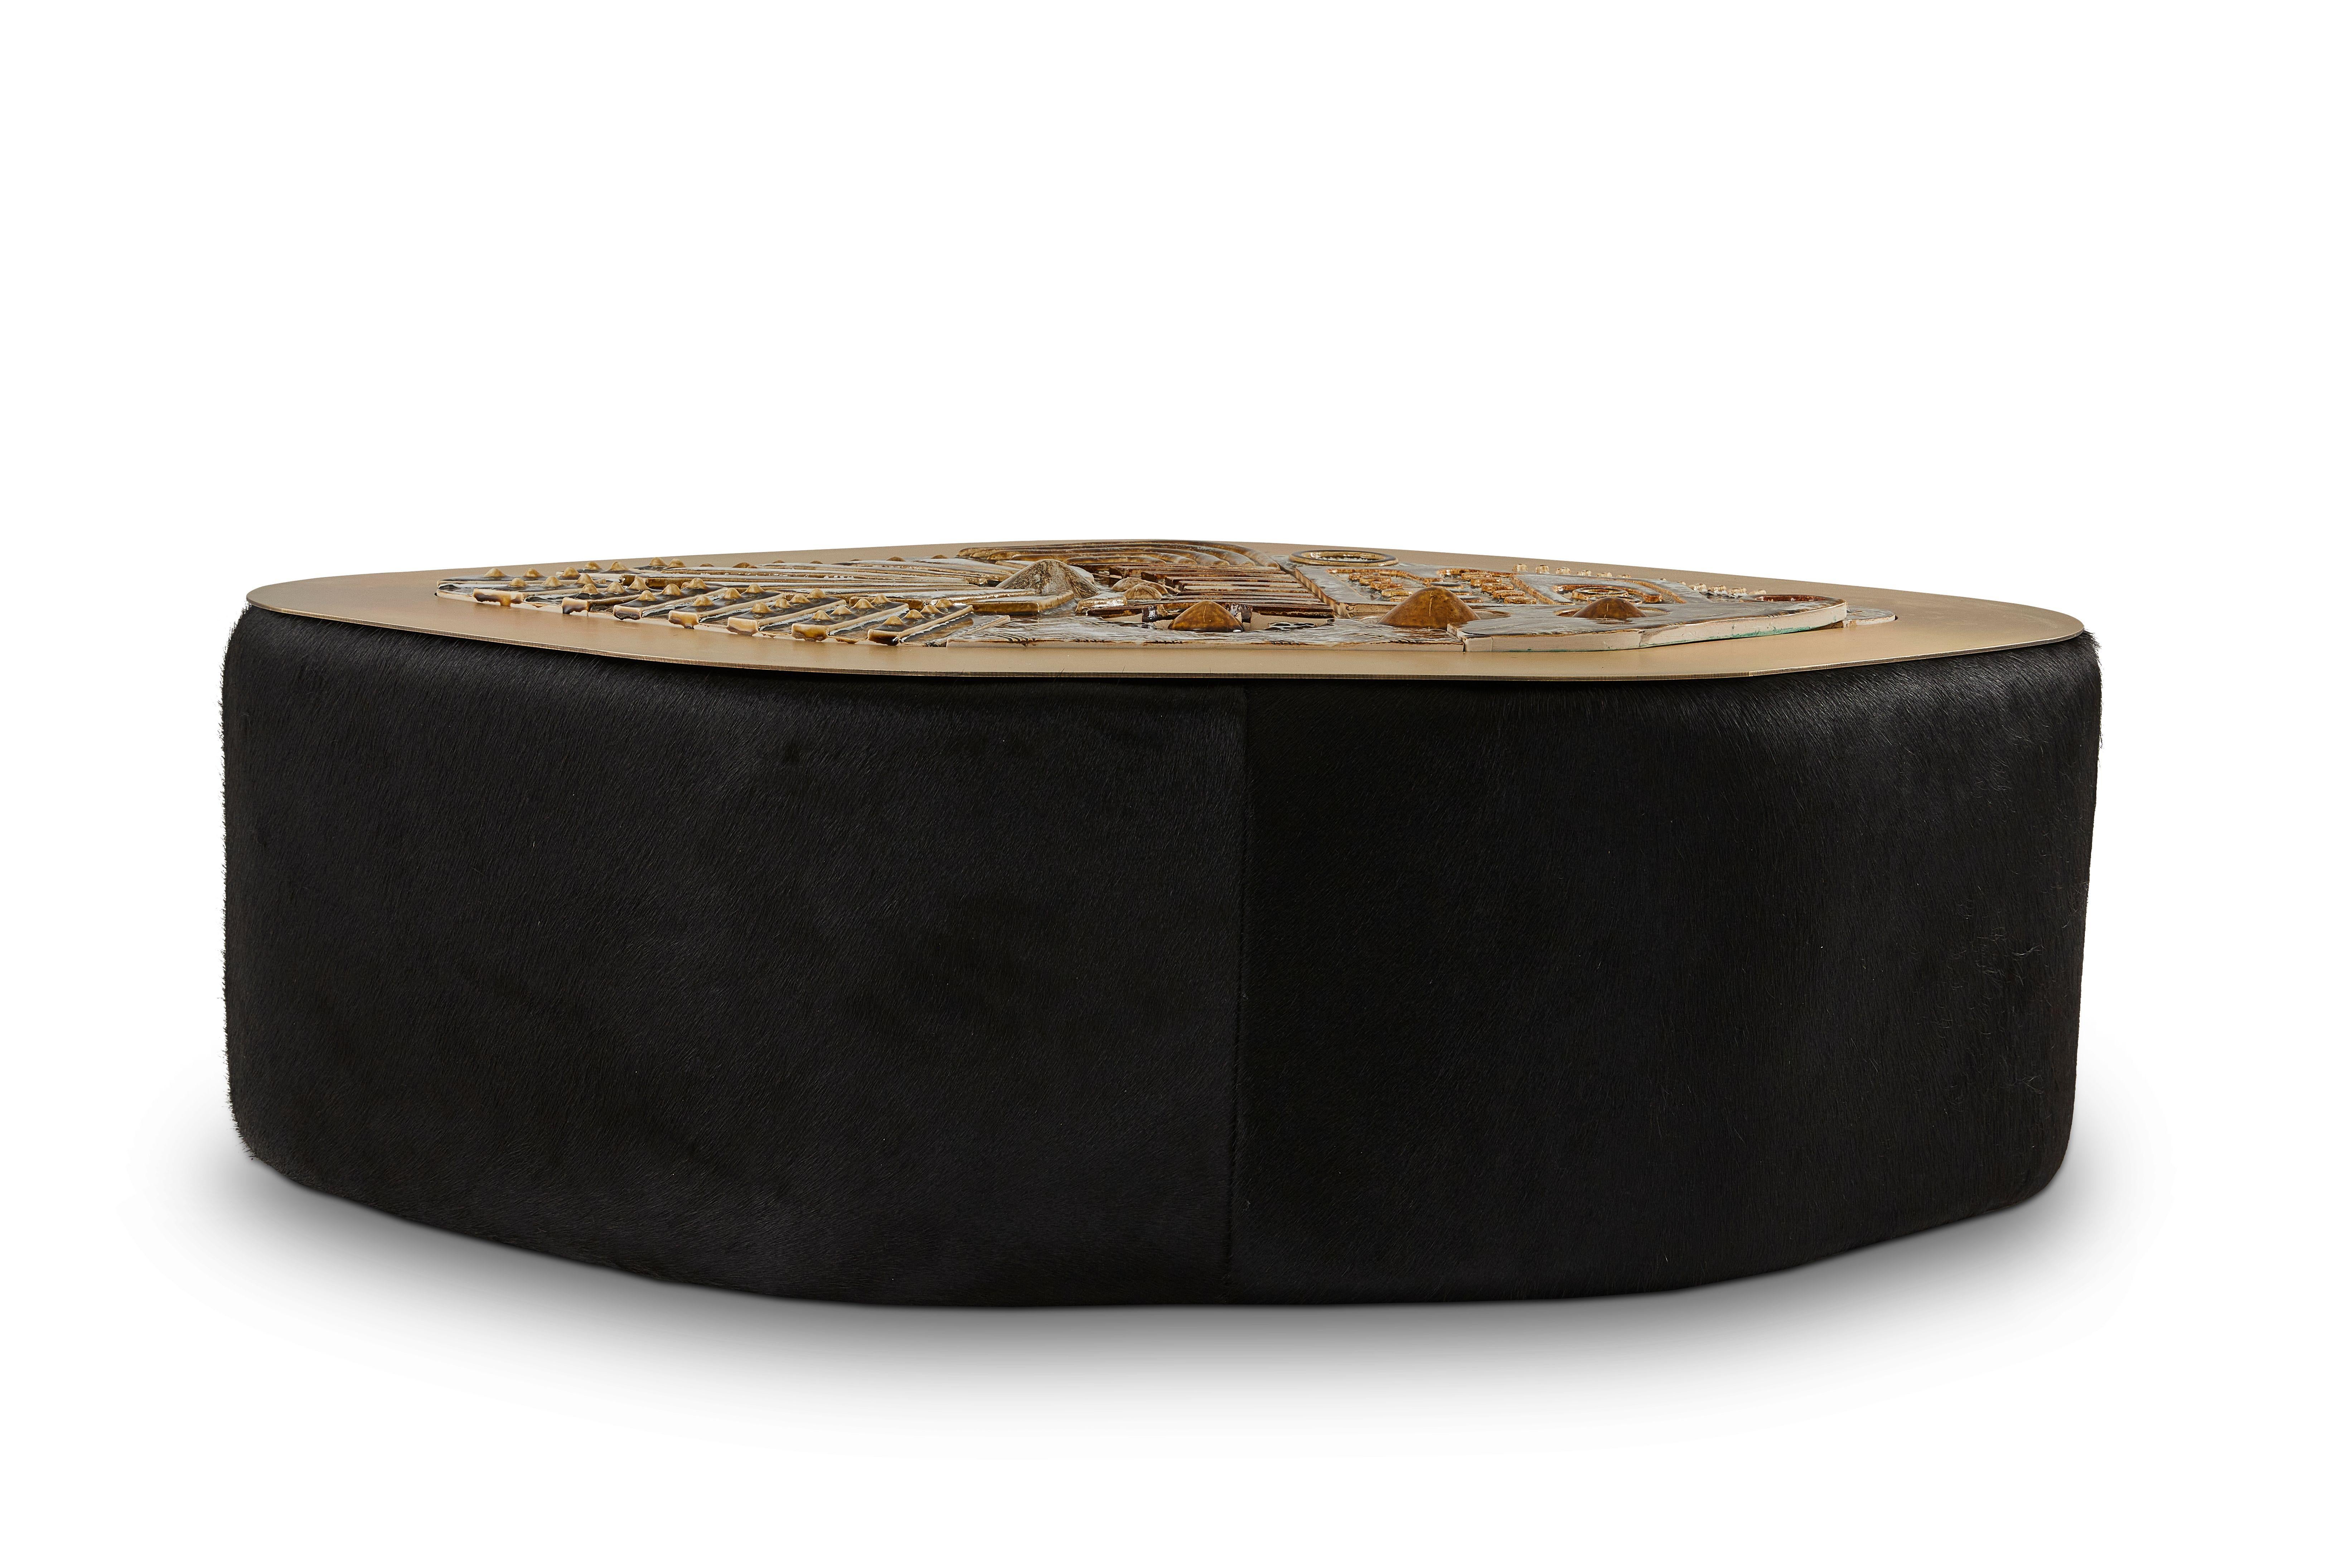 Jive coffee table by Egg Designs
Dimensions: 122 L X 85 D X 49 H cm
Materials: Handmade Ceramic Mural, Bronze Plated Steel, Black Hair On Hide

Founded by South Africans and life partners, Greg and Roche Dry - Egg is a unique perspective in